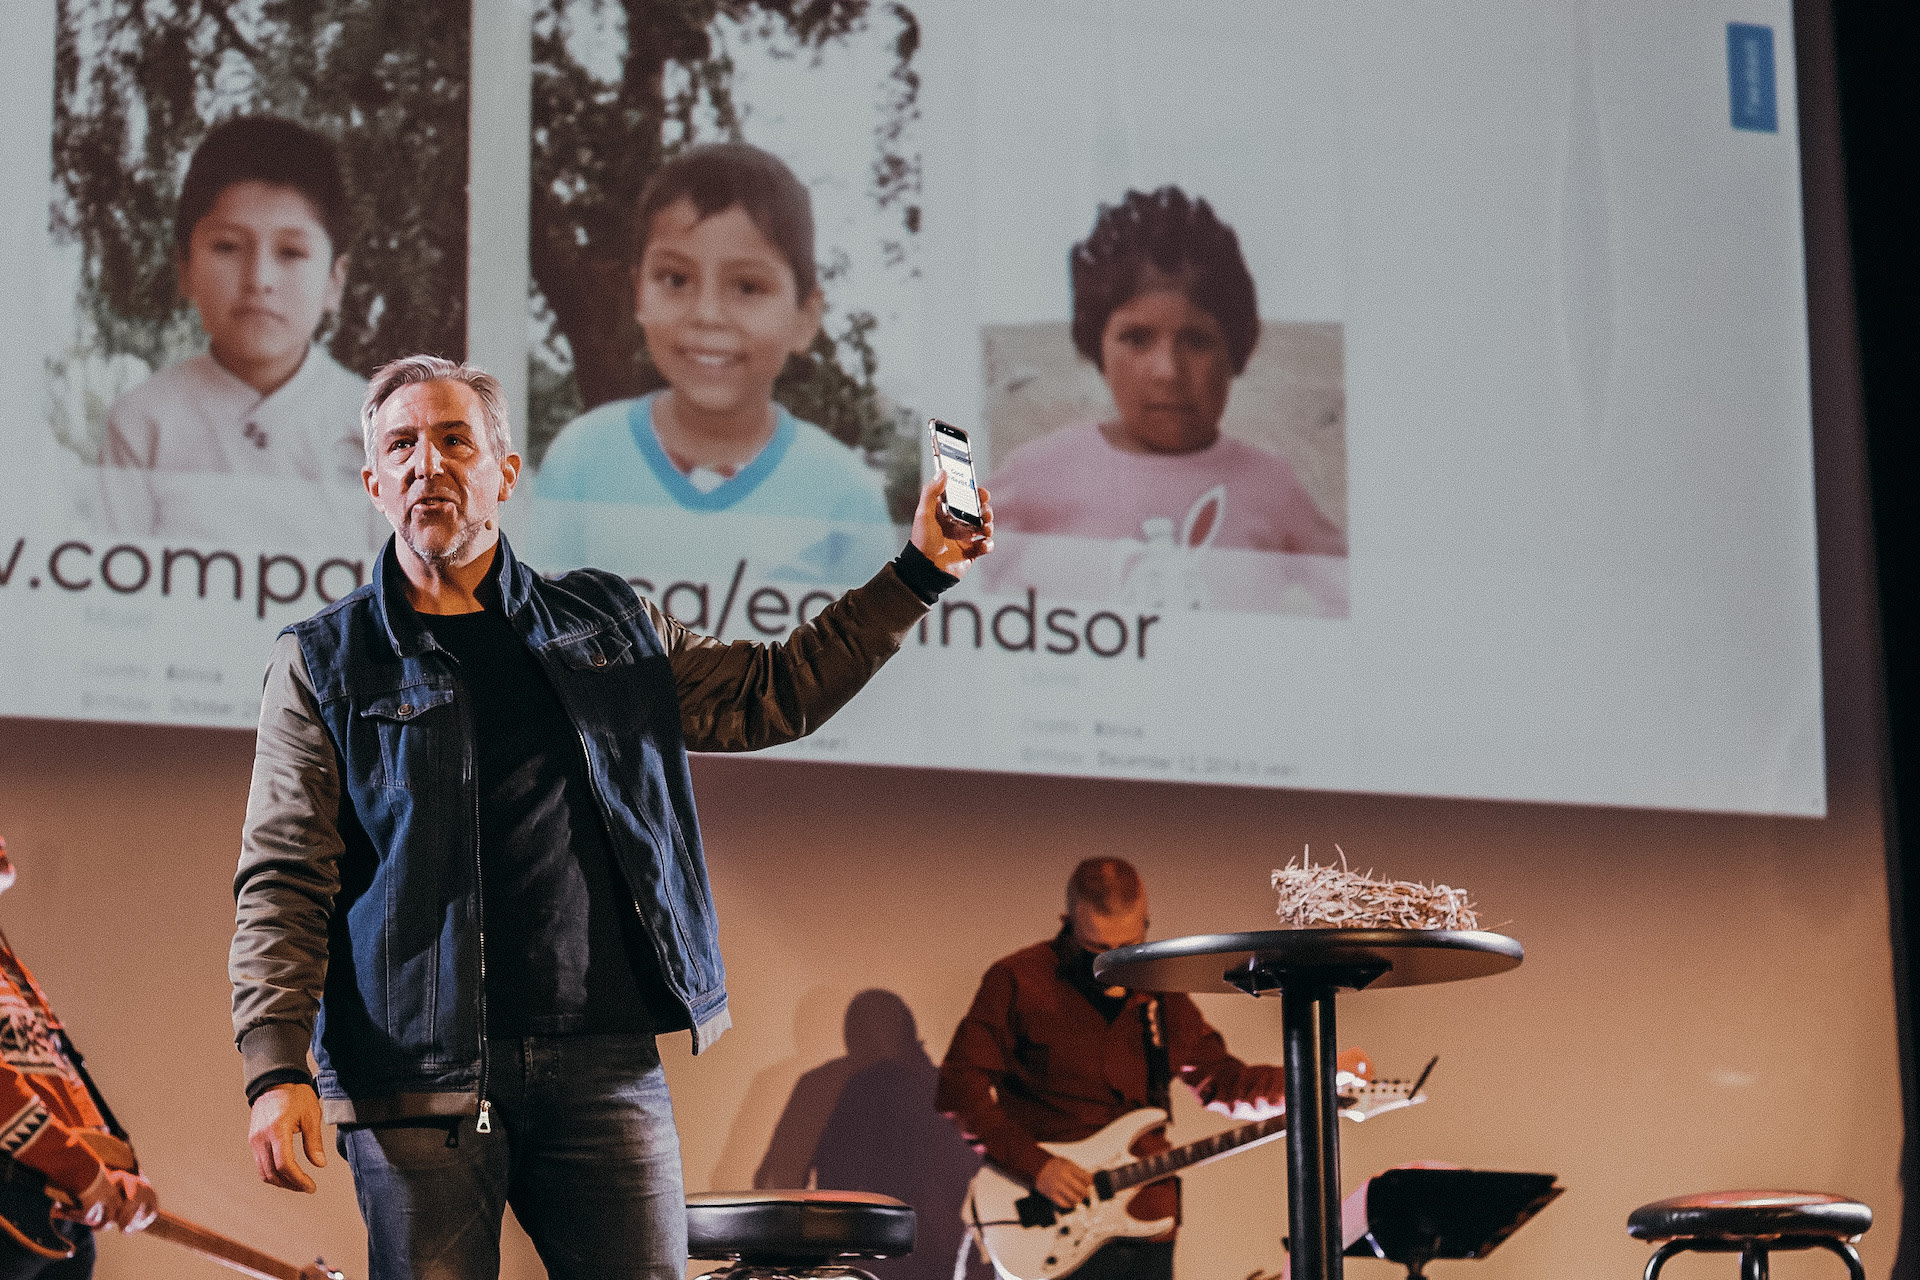 Pastor Brad stands on stage during a church service holding up a smart phone and inviting church members to sponsor a child with Compassion.